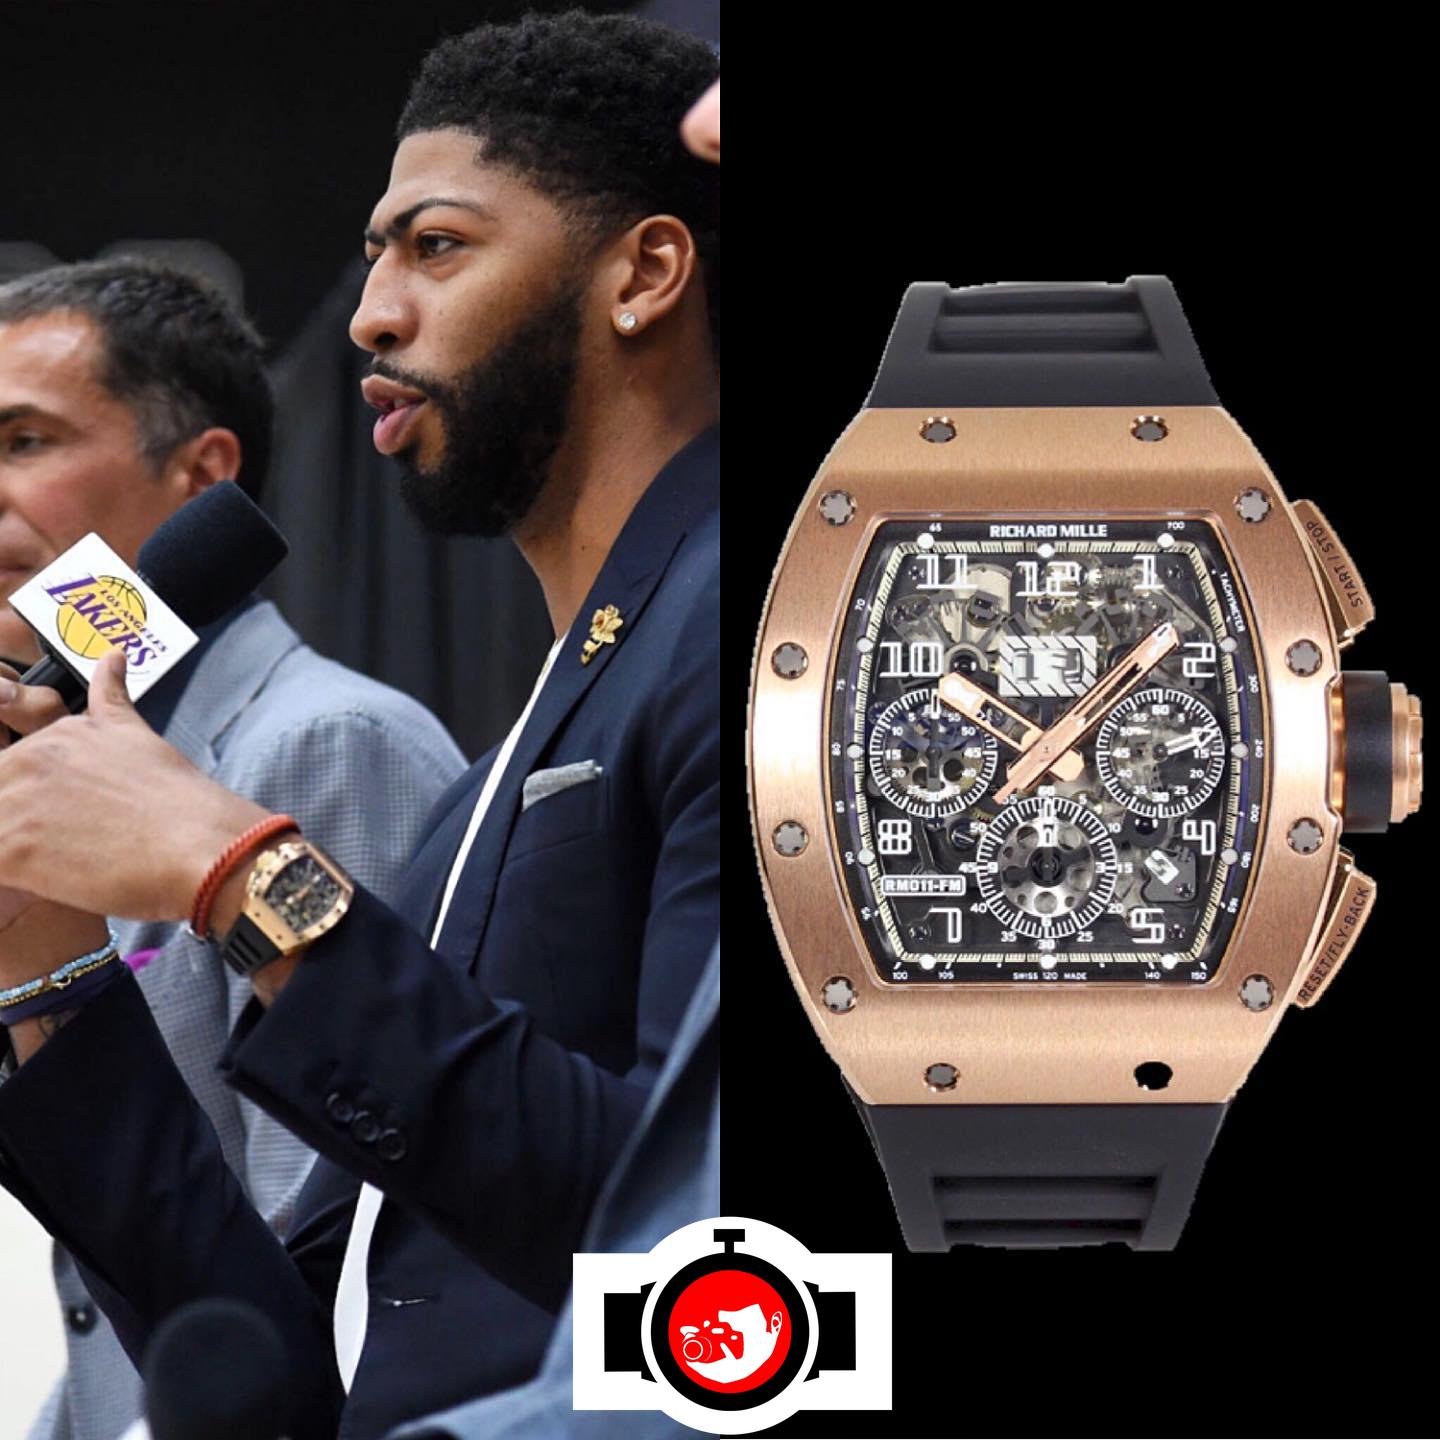 basketball player Anthony Davis spotted wearing a Richard Mille RM11